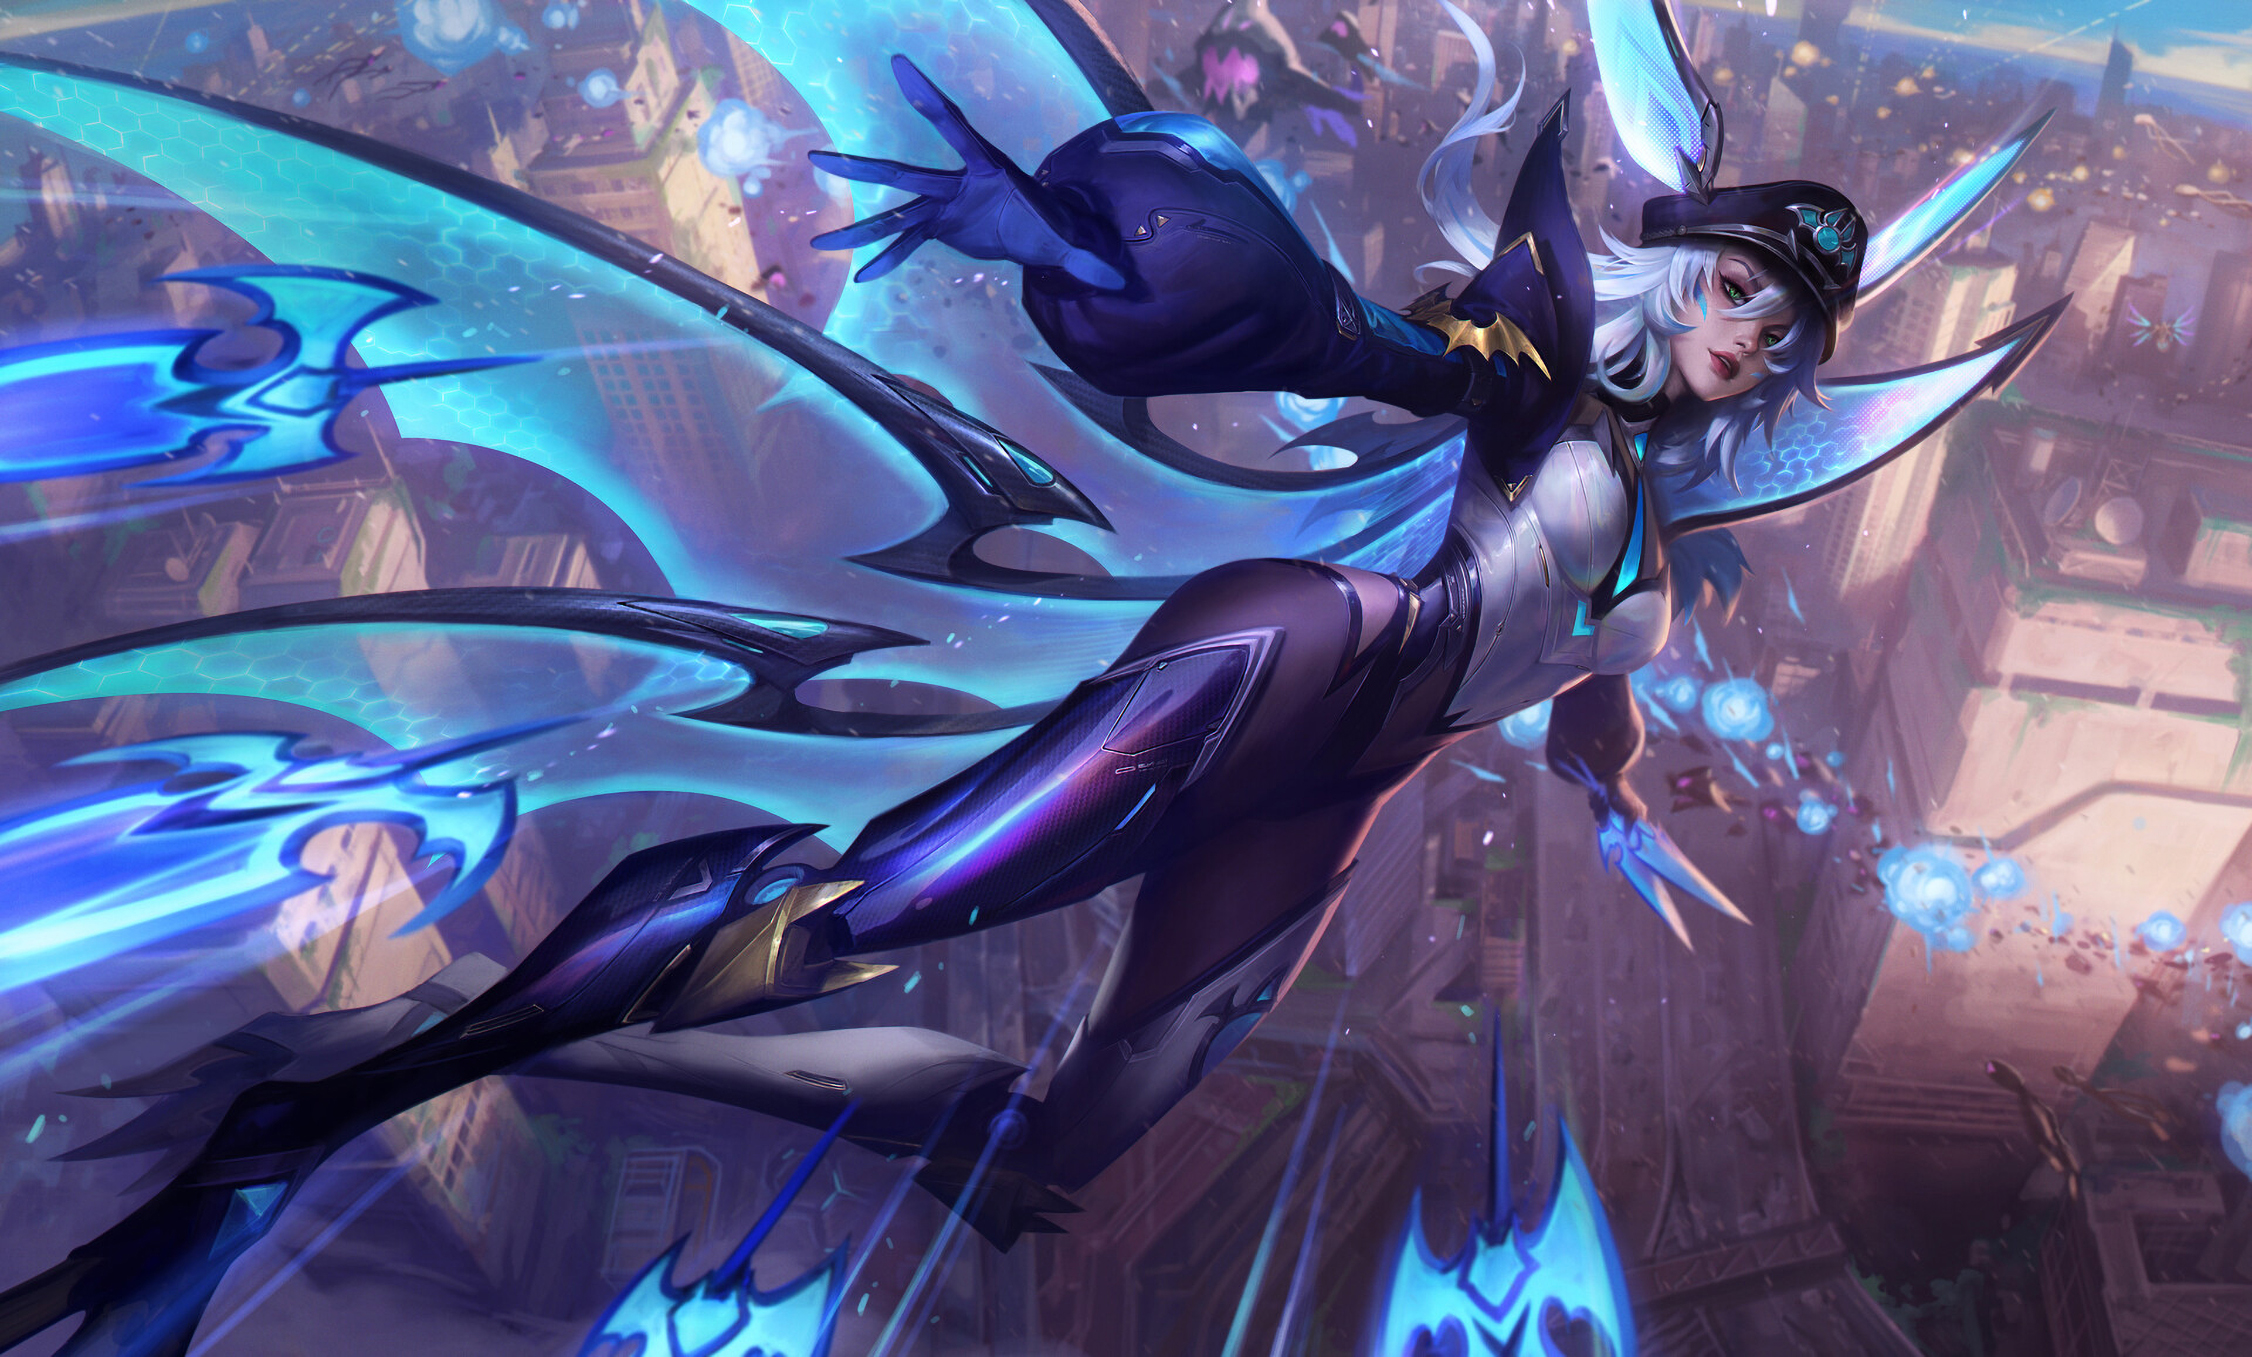 General 2252x1357 Bo Chen drawing Xayah (League of Legends) wings flying cityscape League of Legends Riot Games video games video game characters